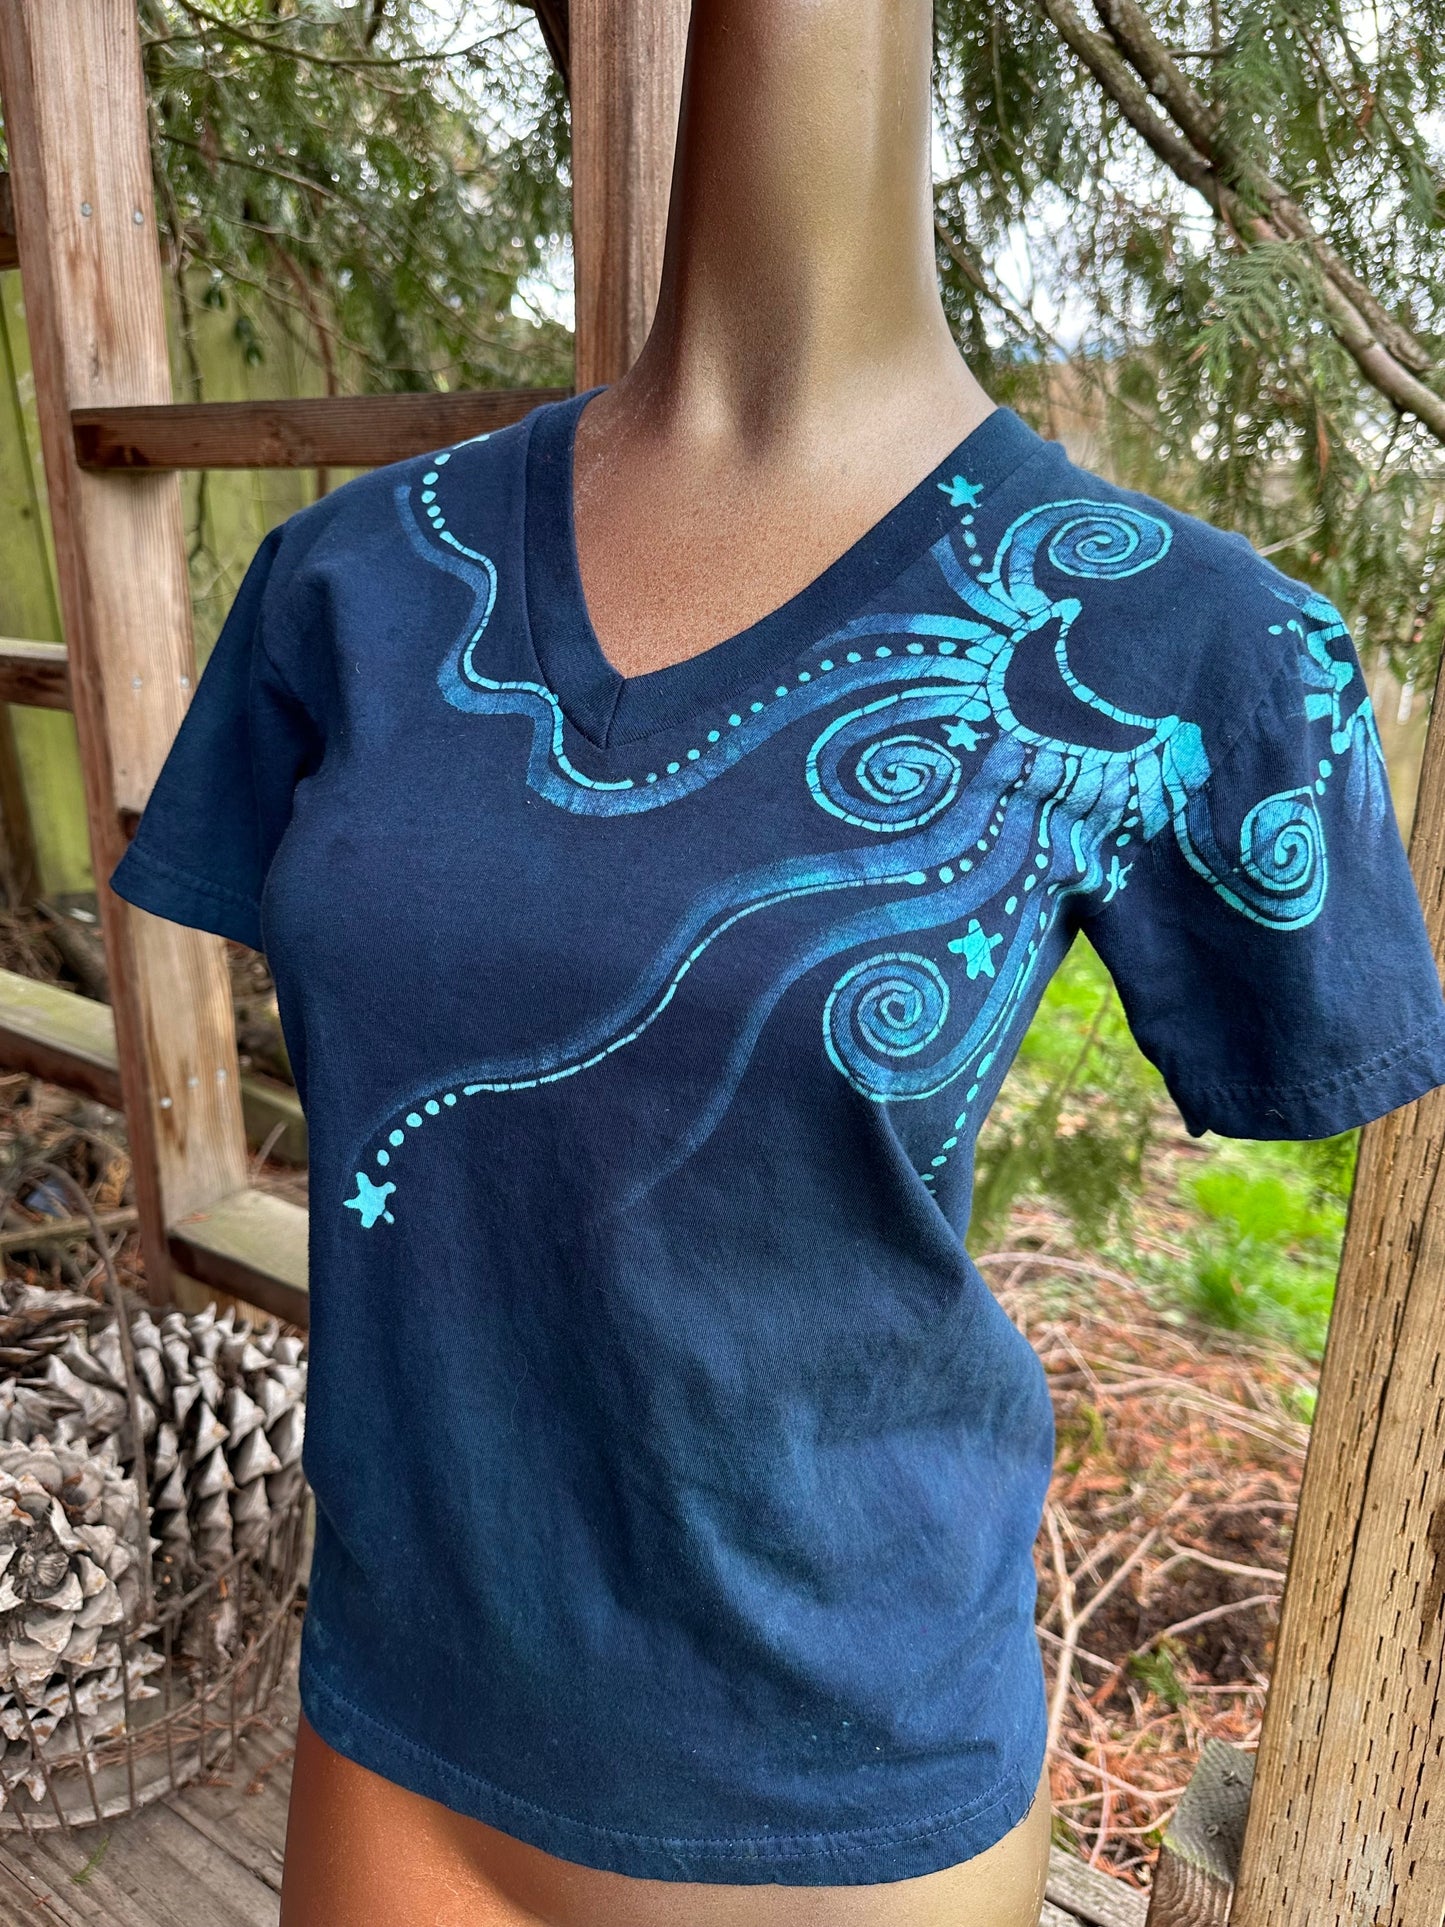 The Stars Will Guide Us Vneck Tee in Blue Teal - Size XS Unisex Tshirts Batikwalla by Victoria XS 